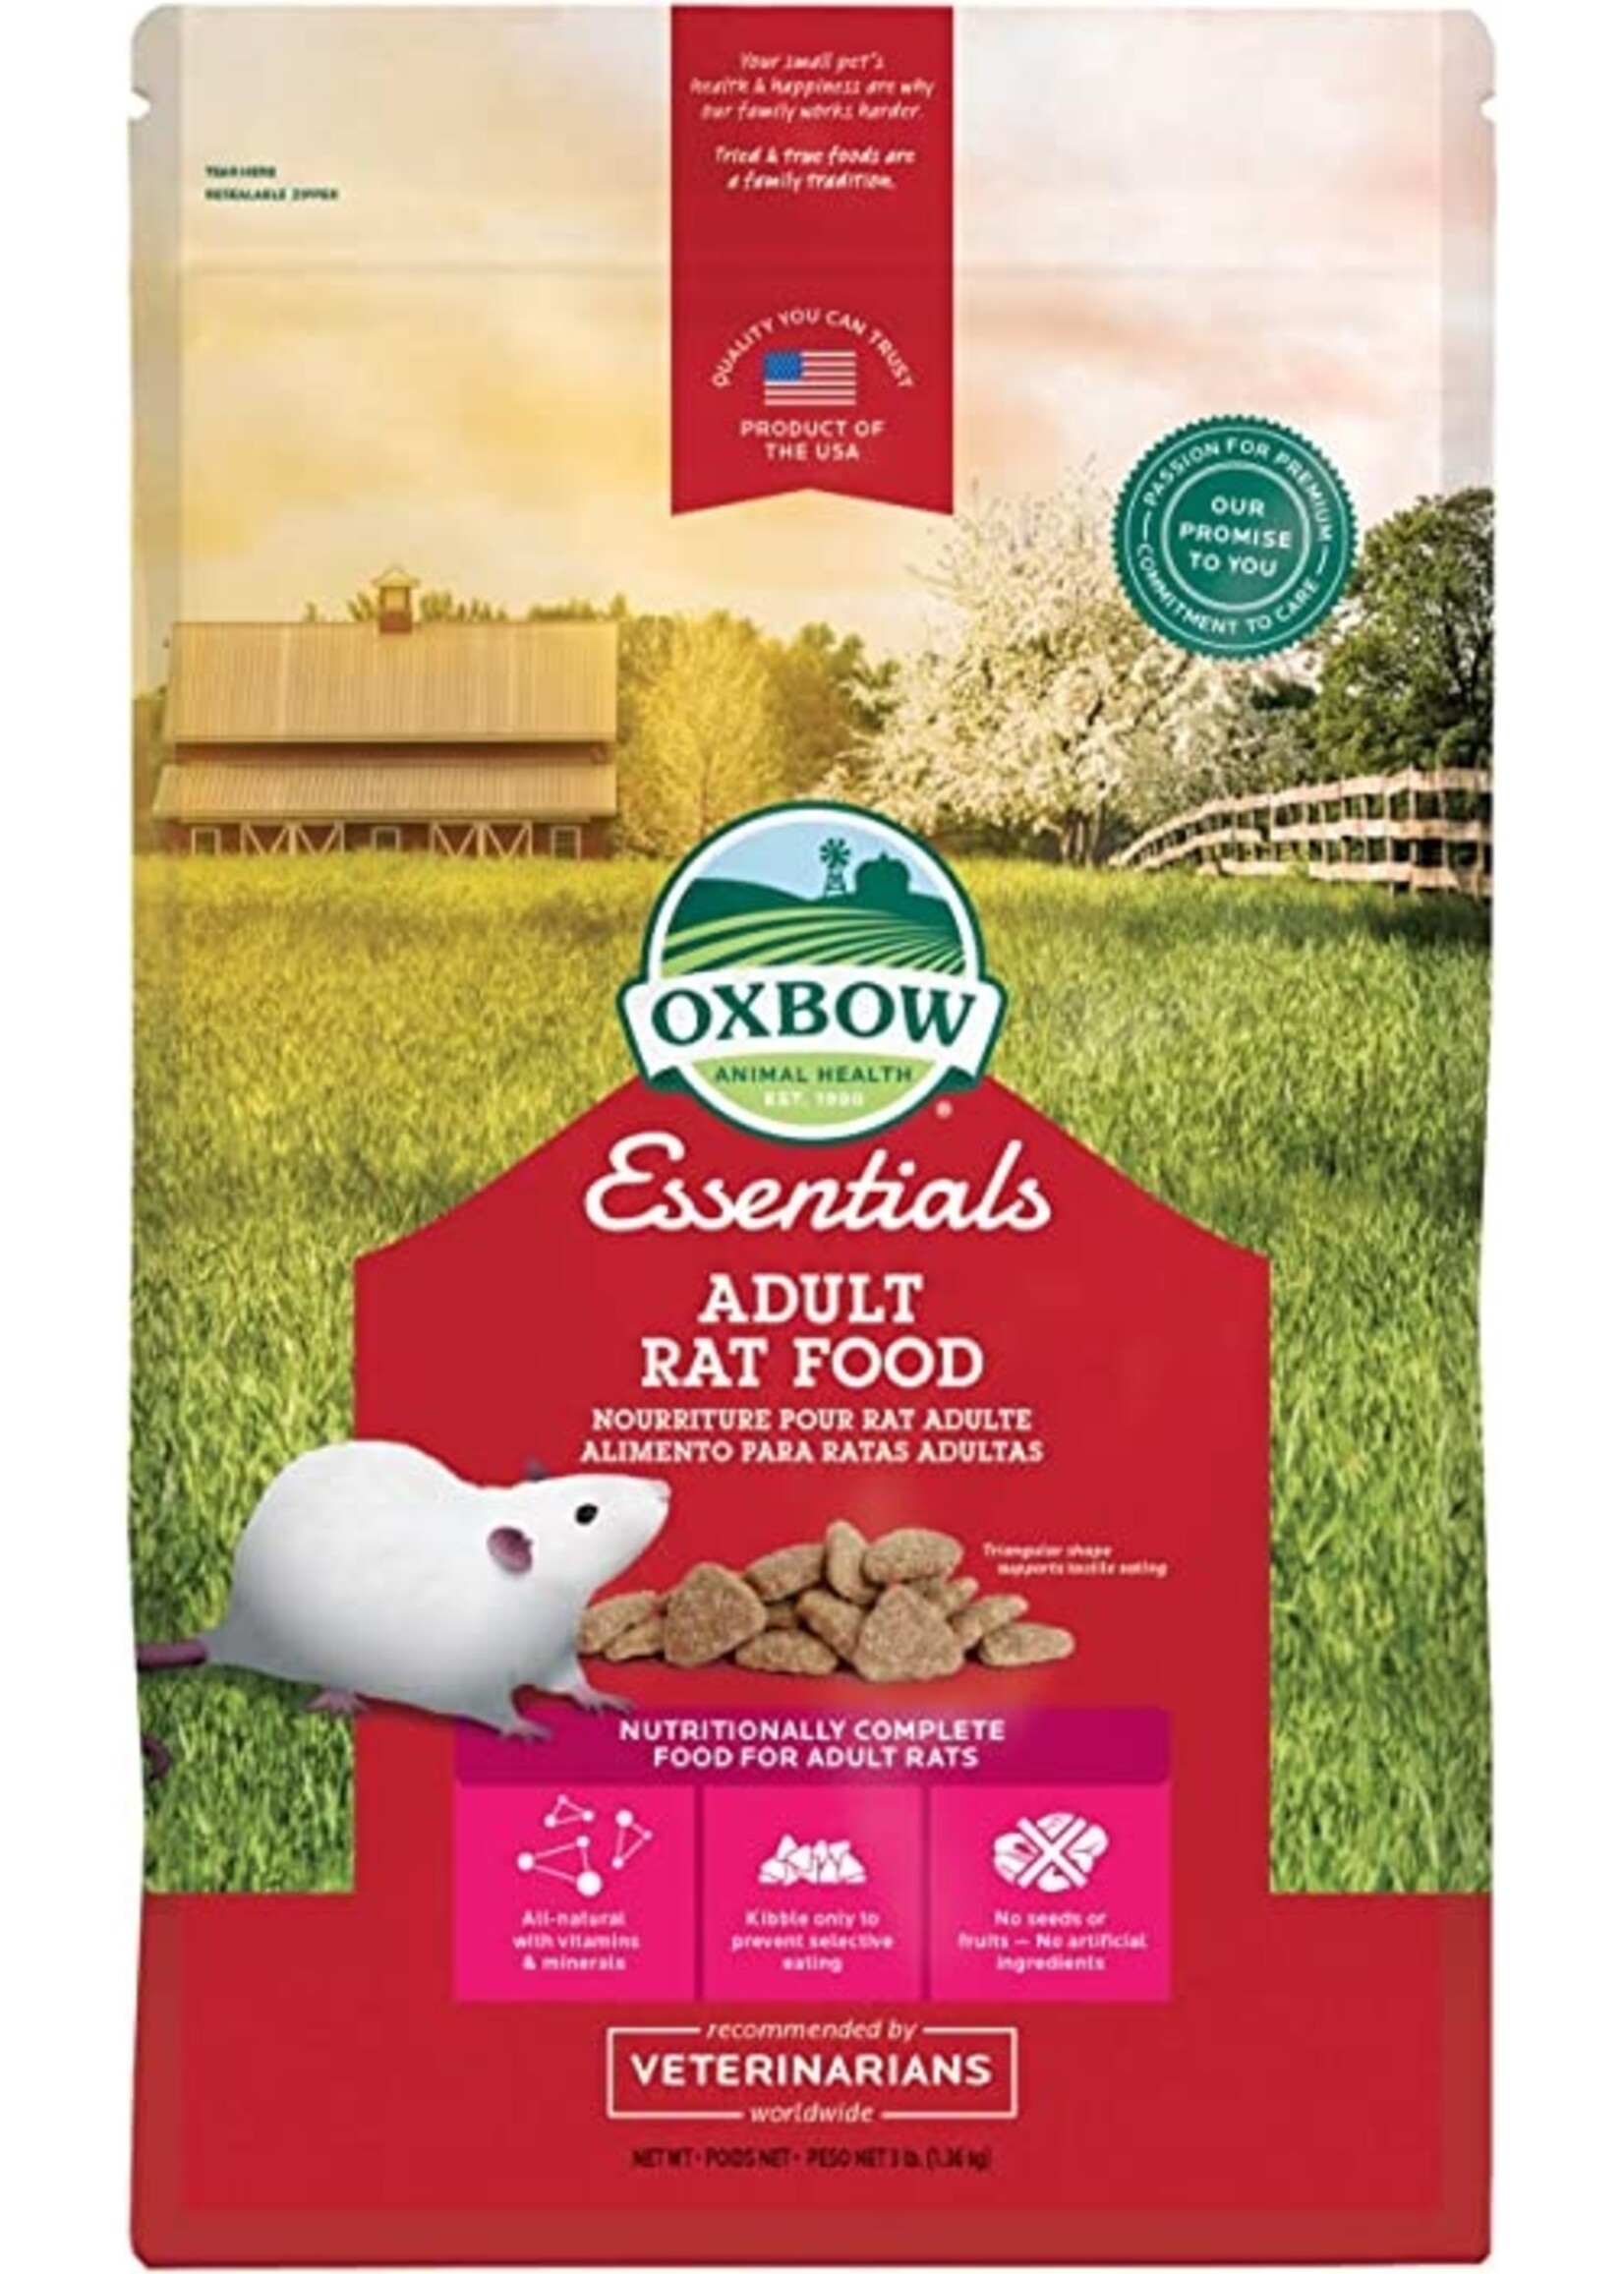 Oxbow Oxbow Essentials Adult Rat